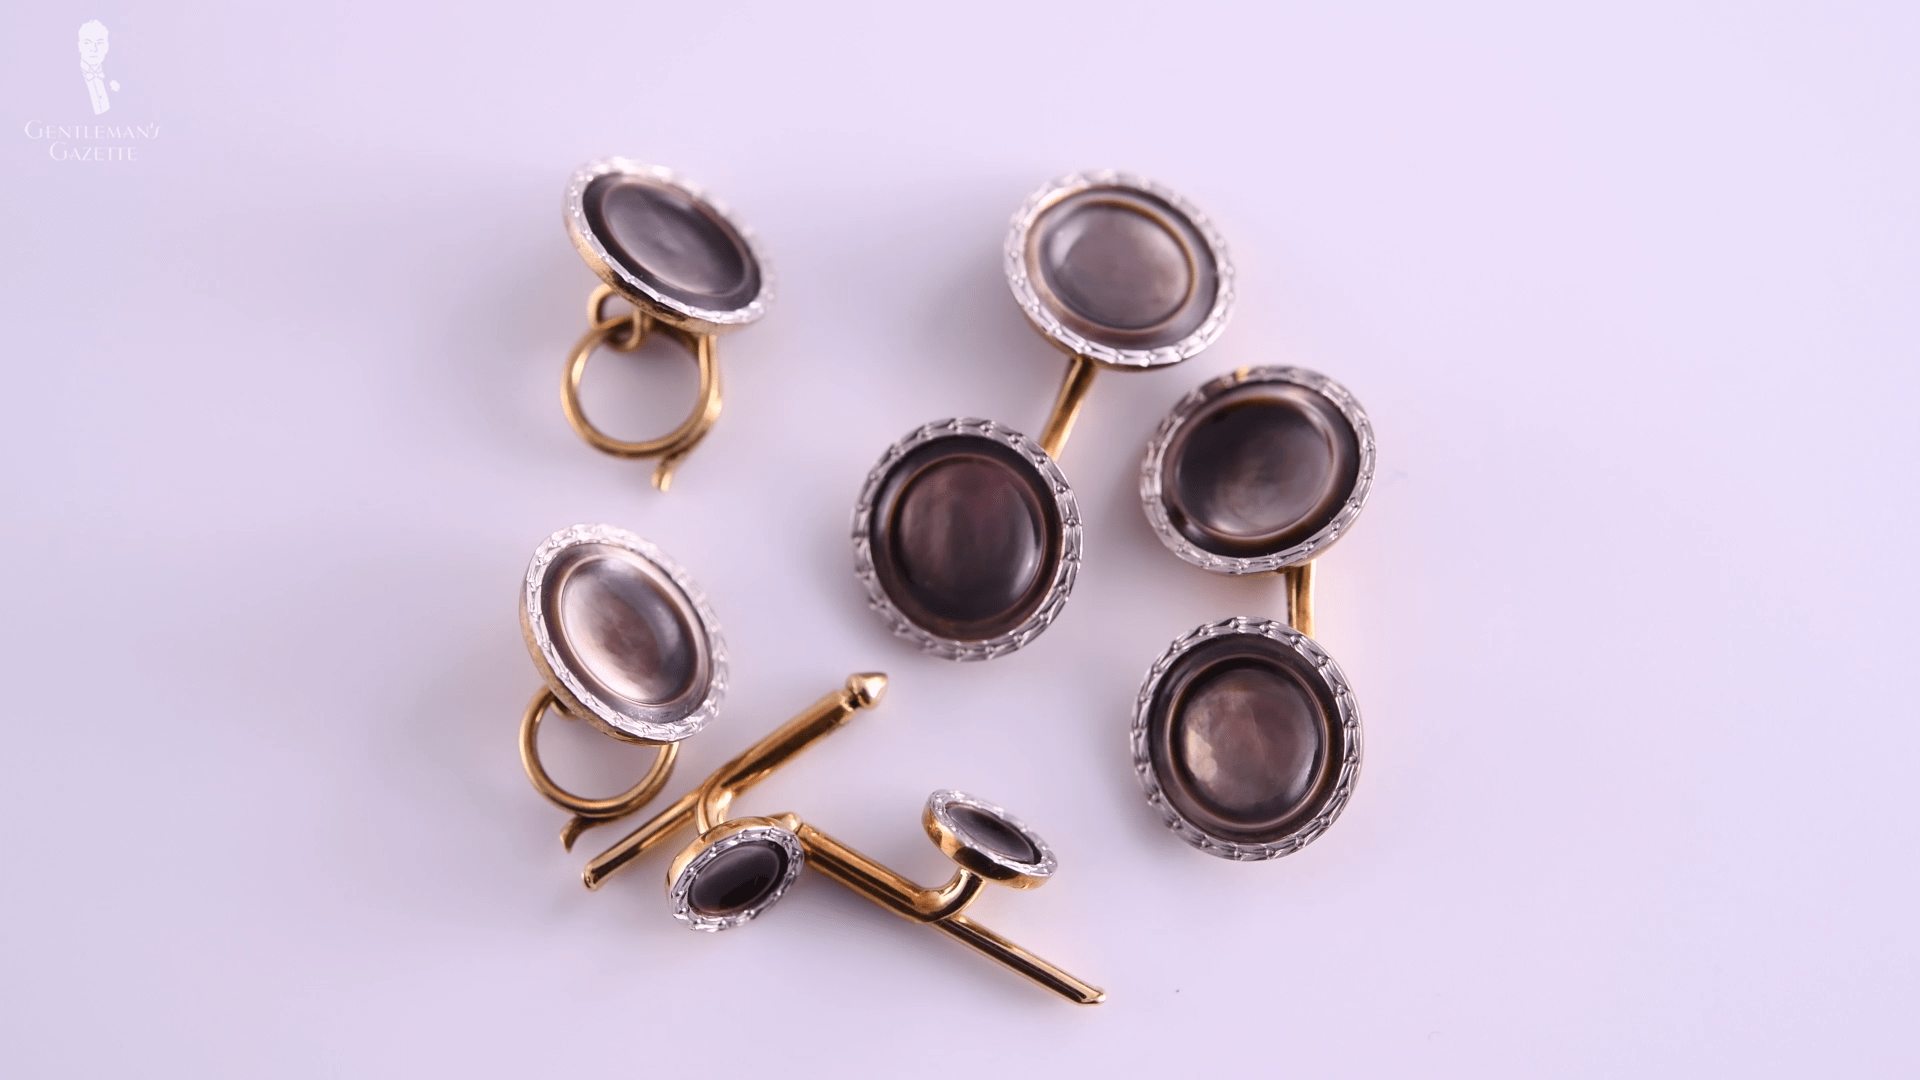 Details about   Red Abalone Oval Cufflinks with matching Cravat/Tie Pin Silver plated.